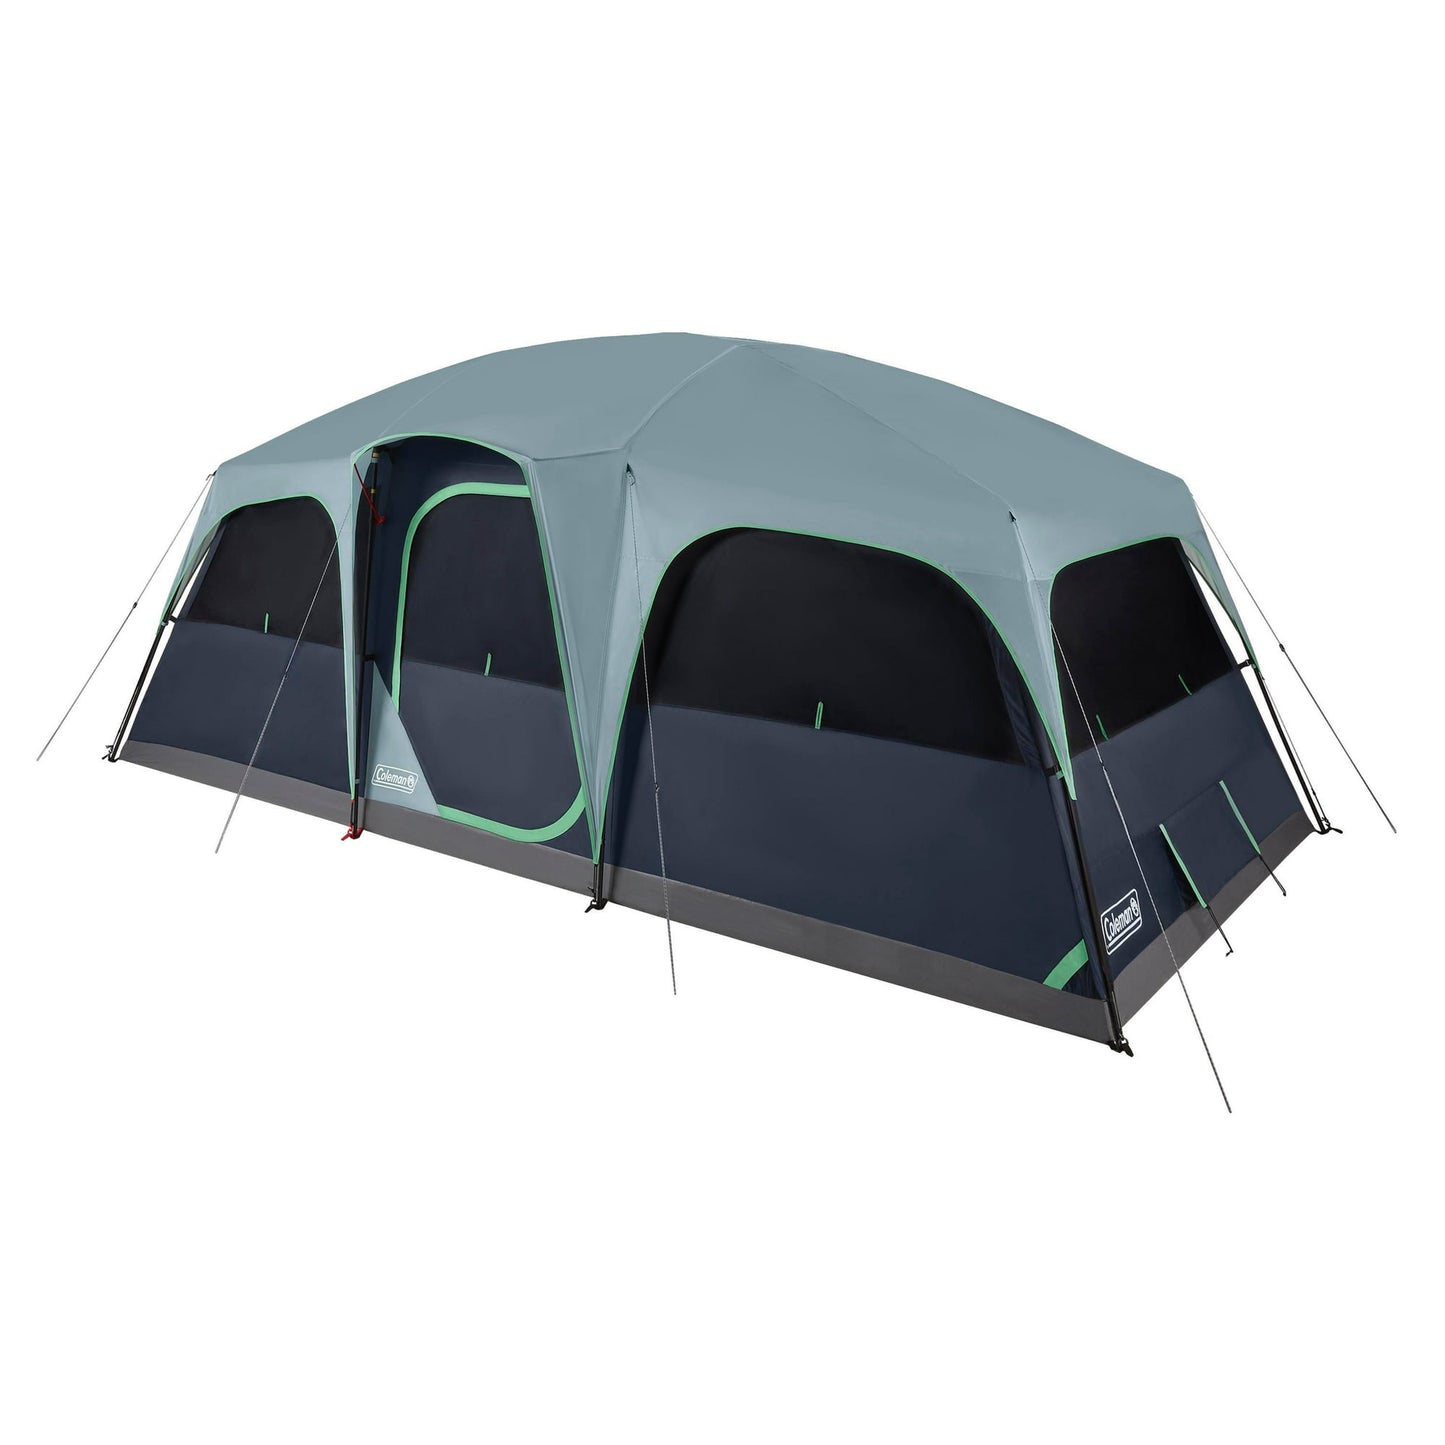 Sunlodge™ 10-Person Camping Tent, Blue Nights